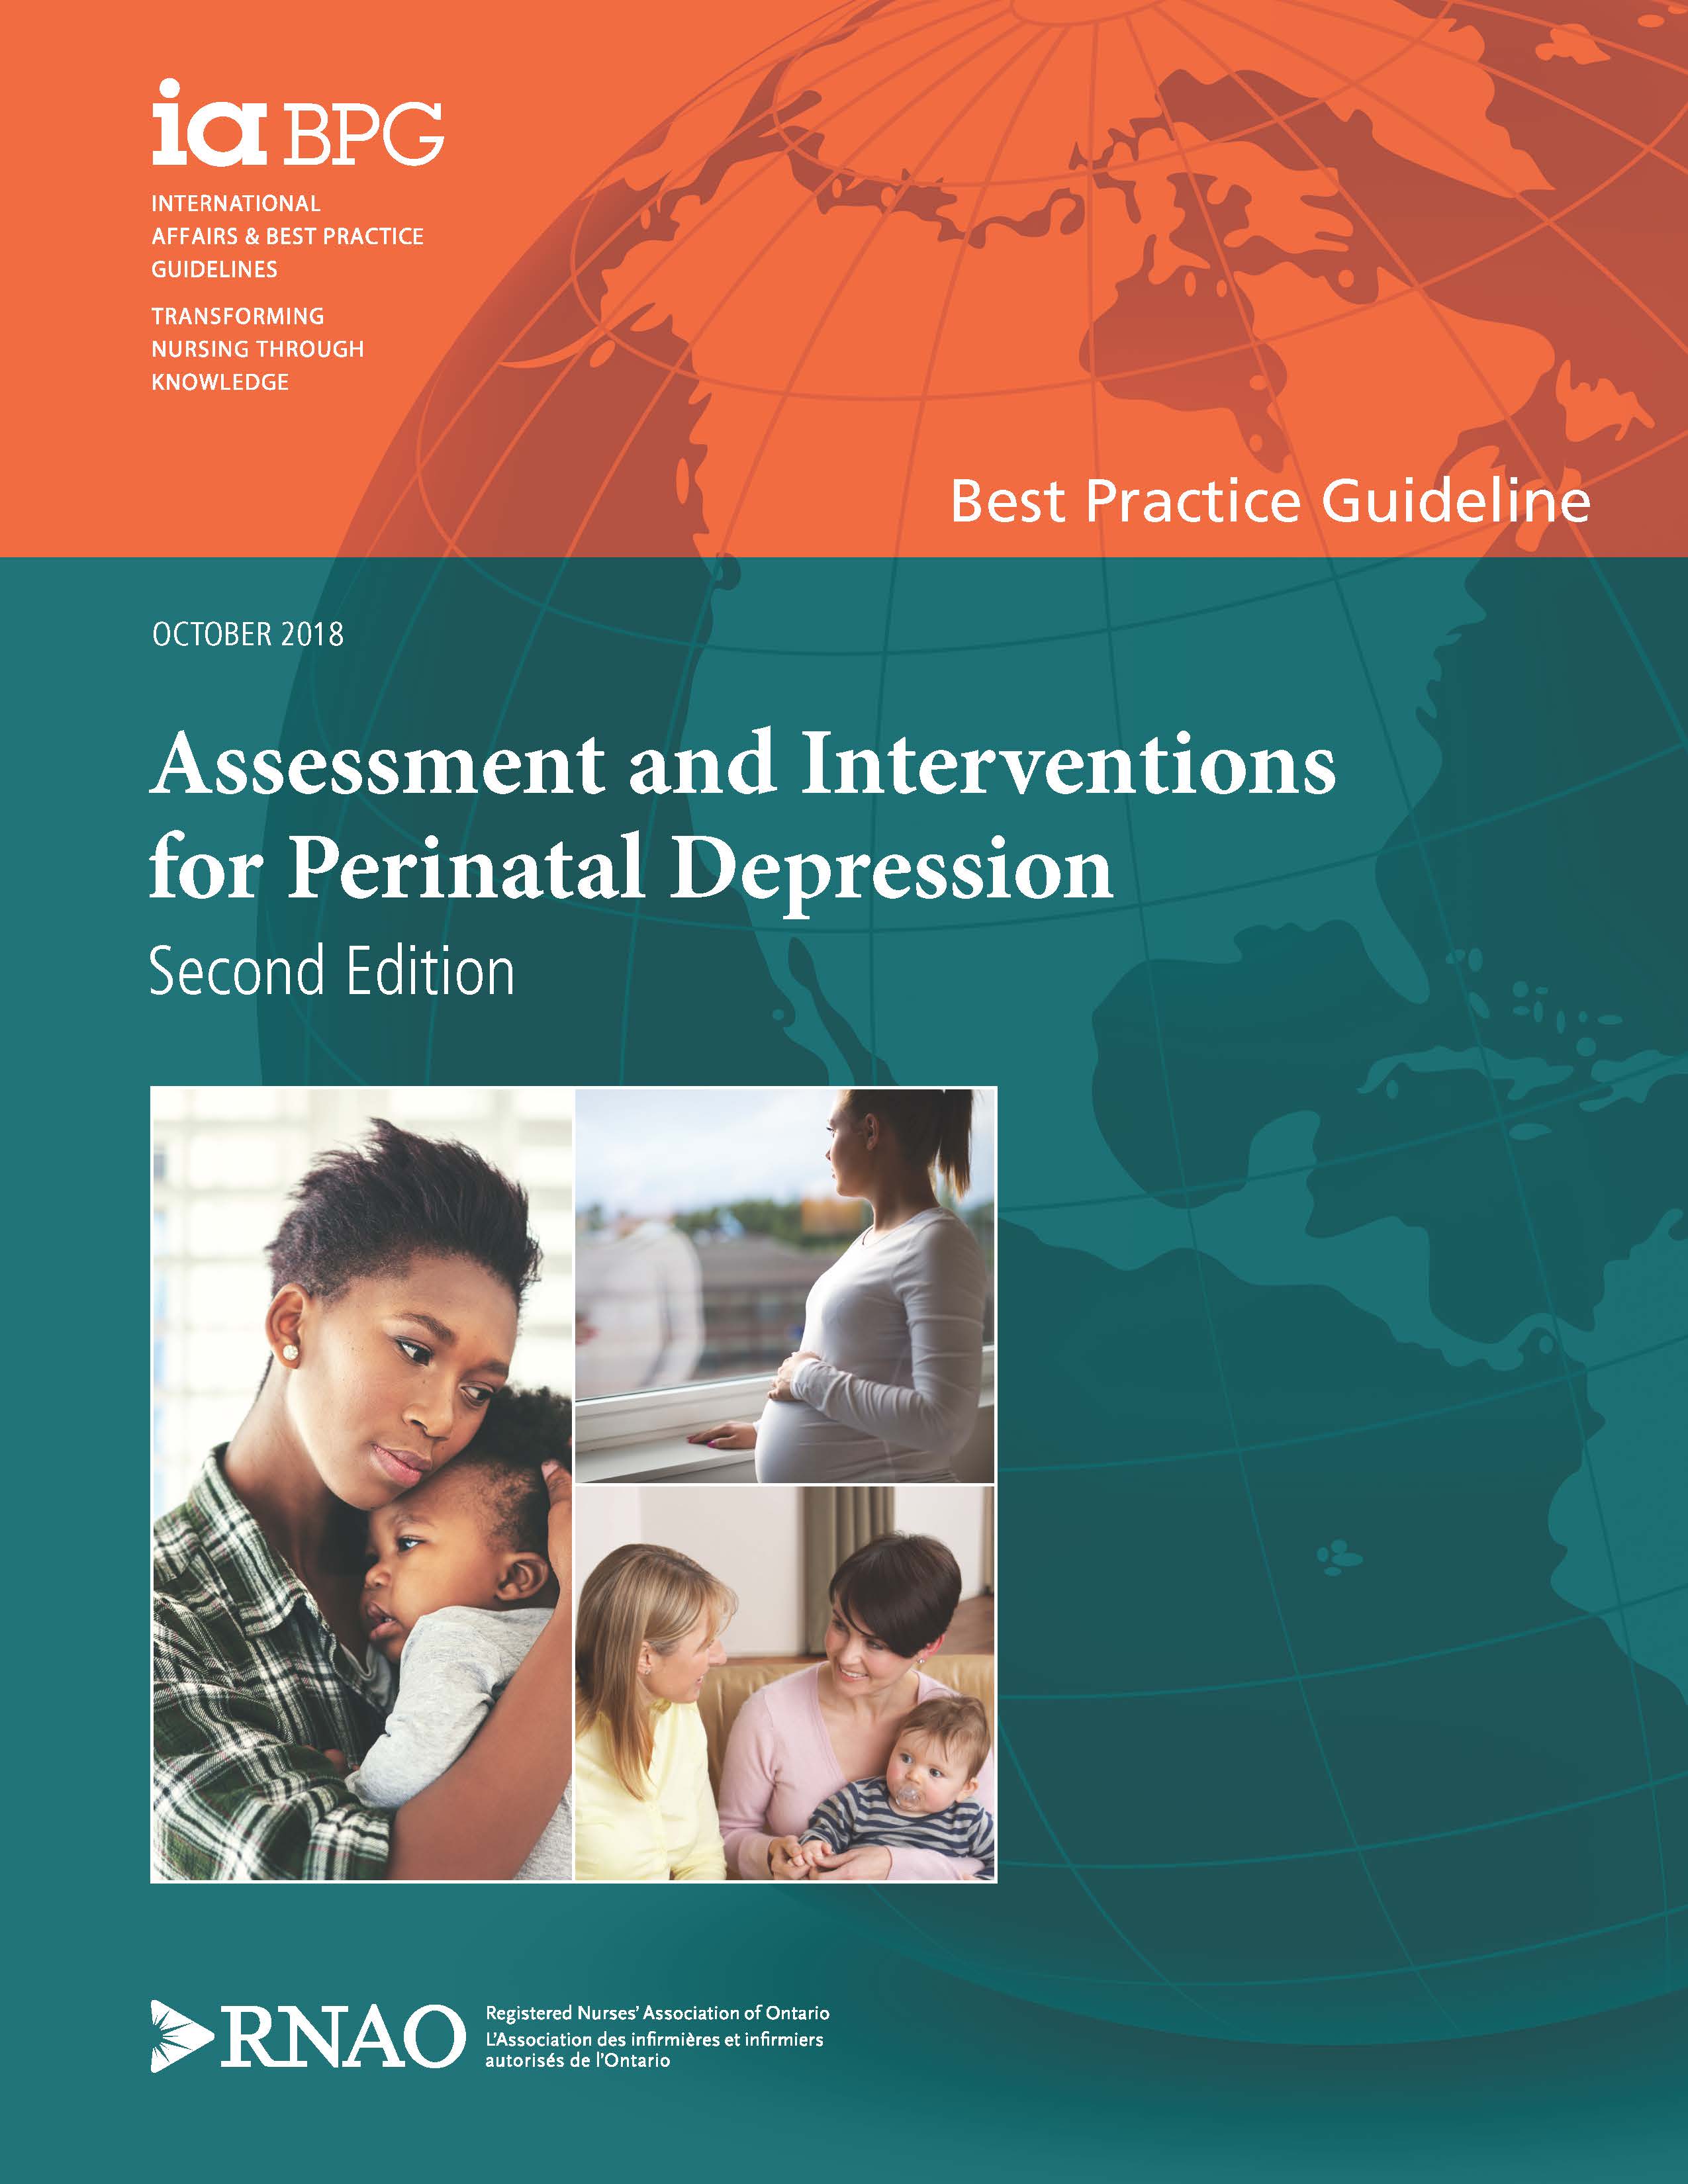 Assessment and Interventions for Perinatal Depression